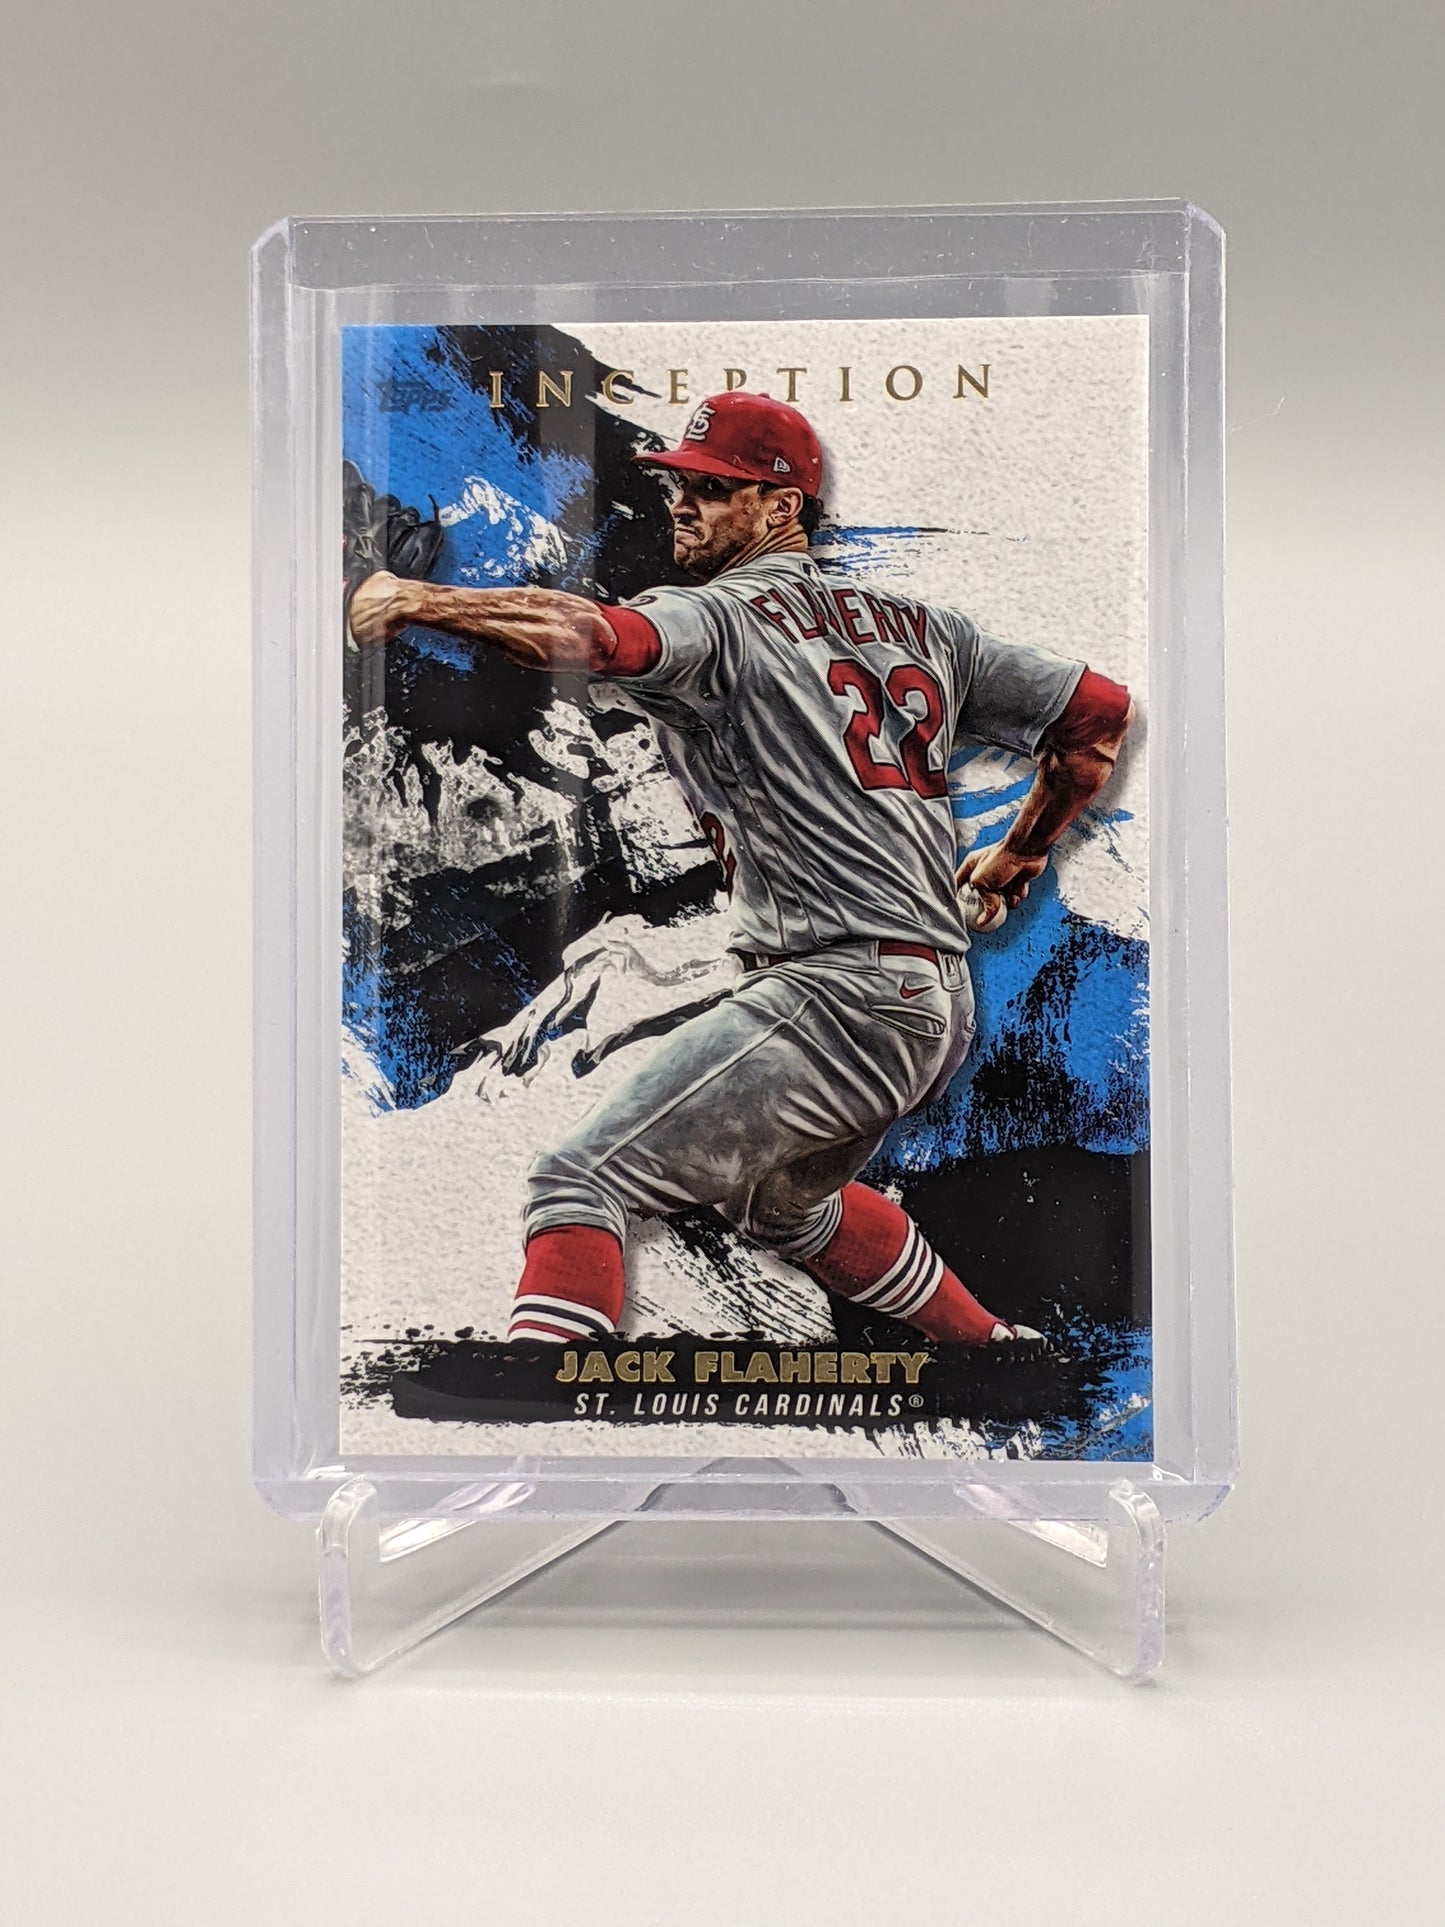 2021 Topps Inception #47 Jack Flaherty